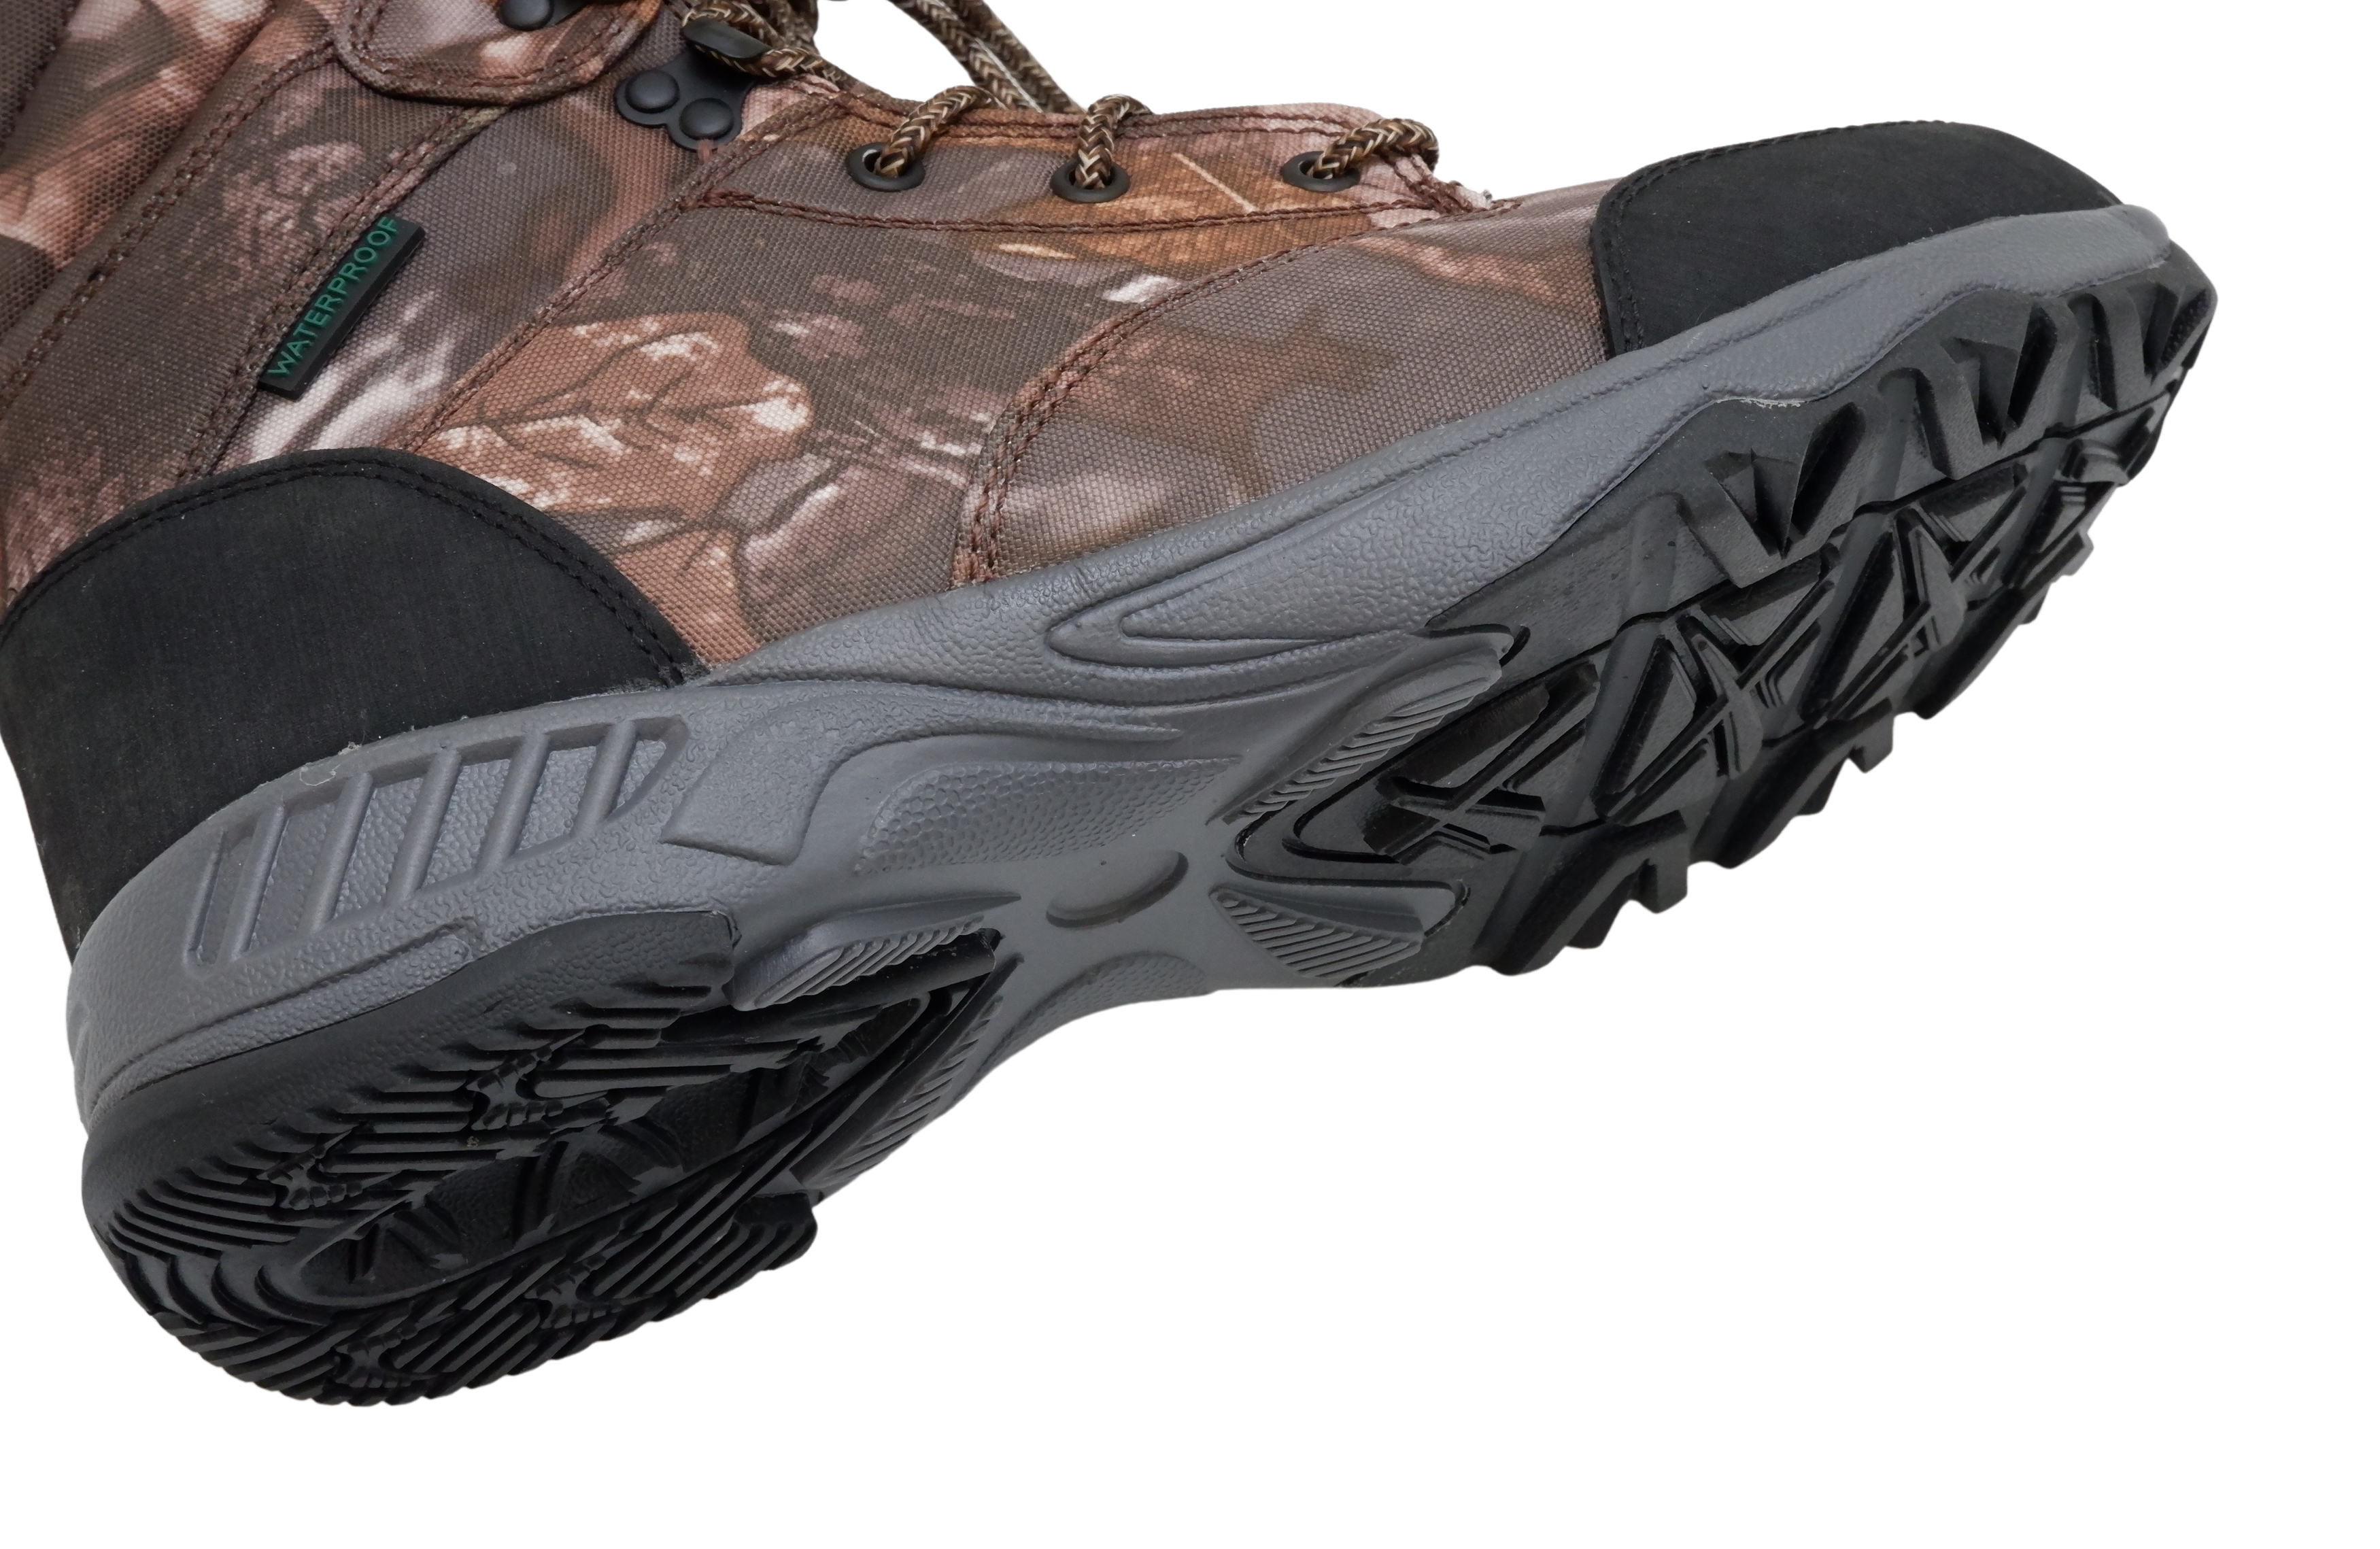 Green Trail Men's Carcajou Waterproof Hunting Boots with Thinsulate Lining | Size 7 - 13